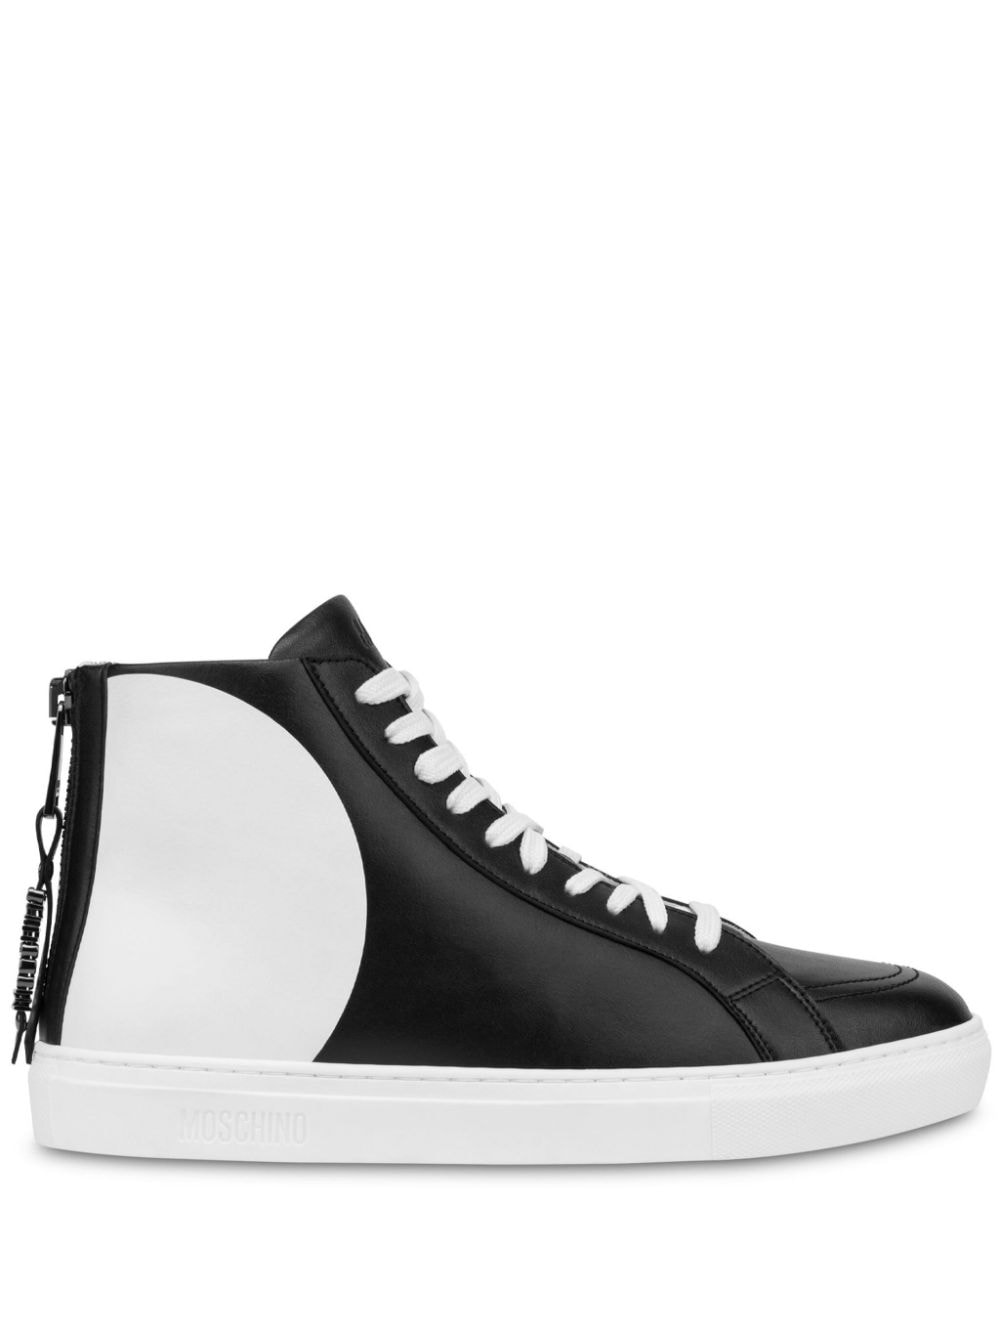 Moschino Faux-leather Hi-top Sneakers In Black